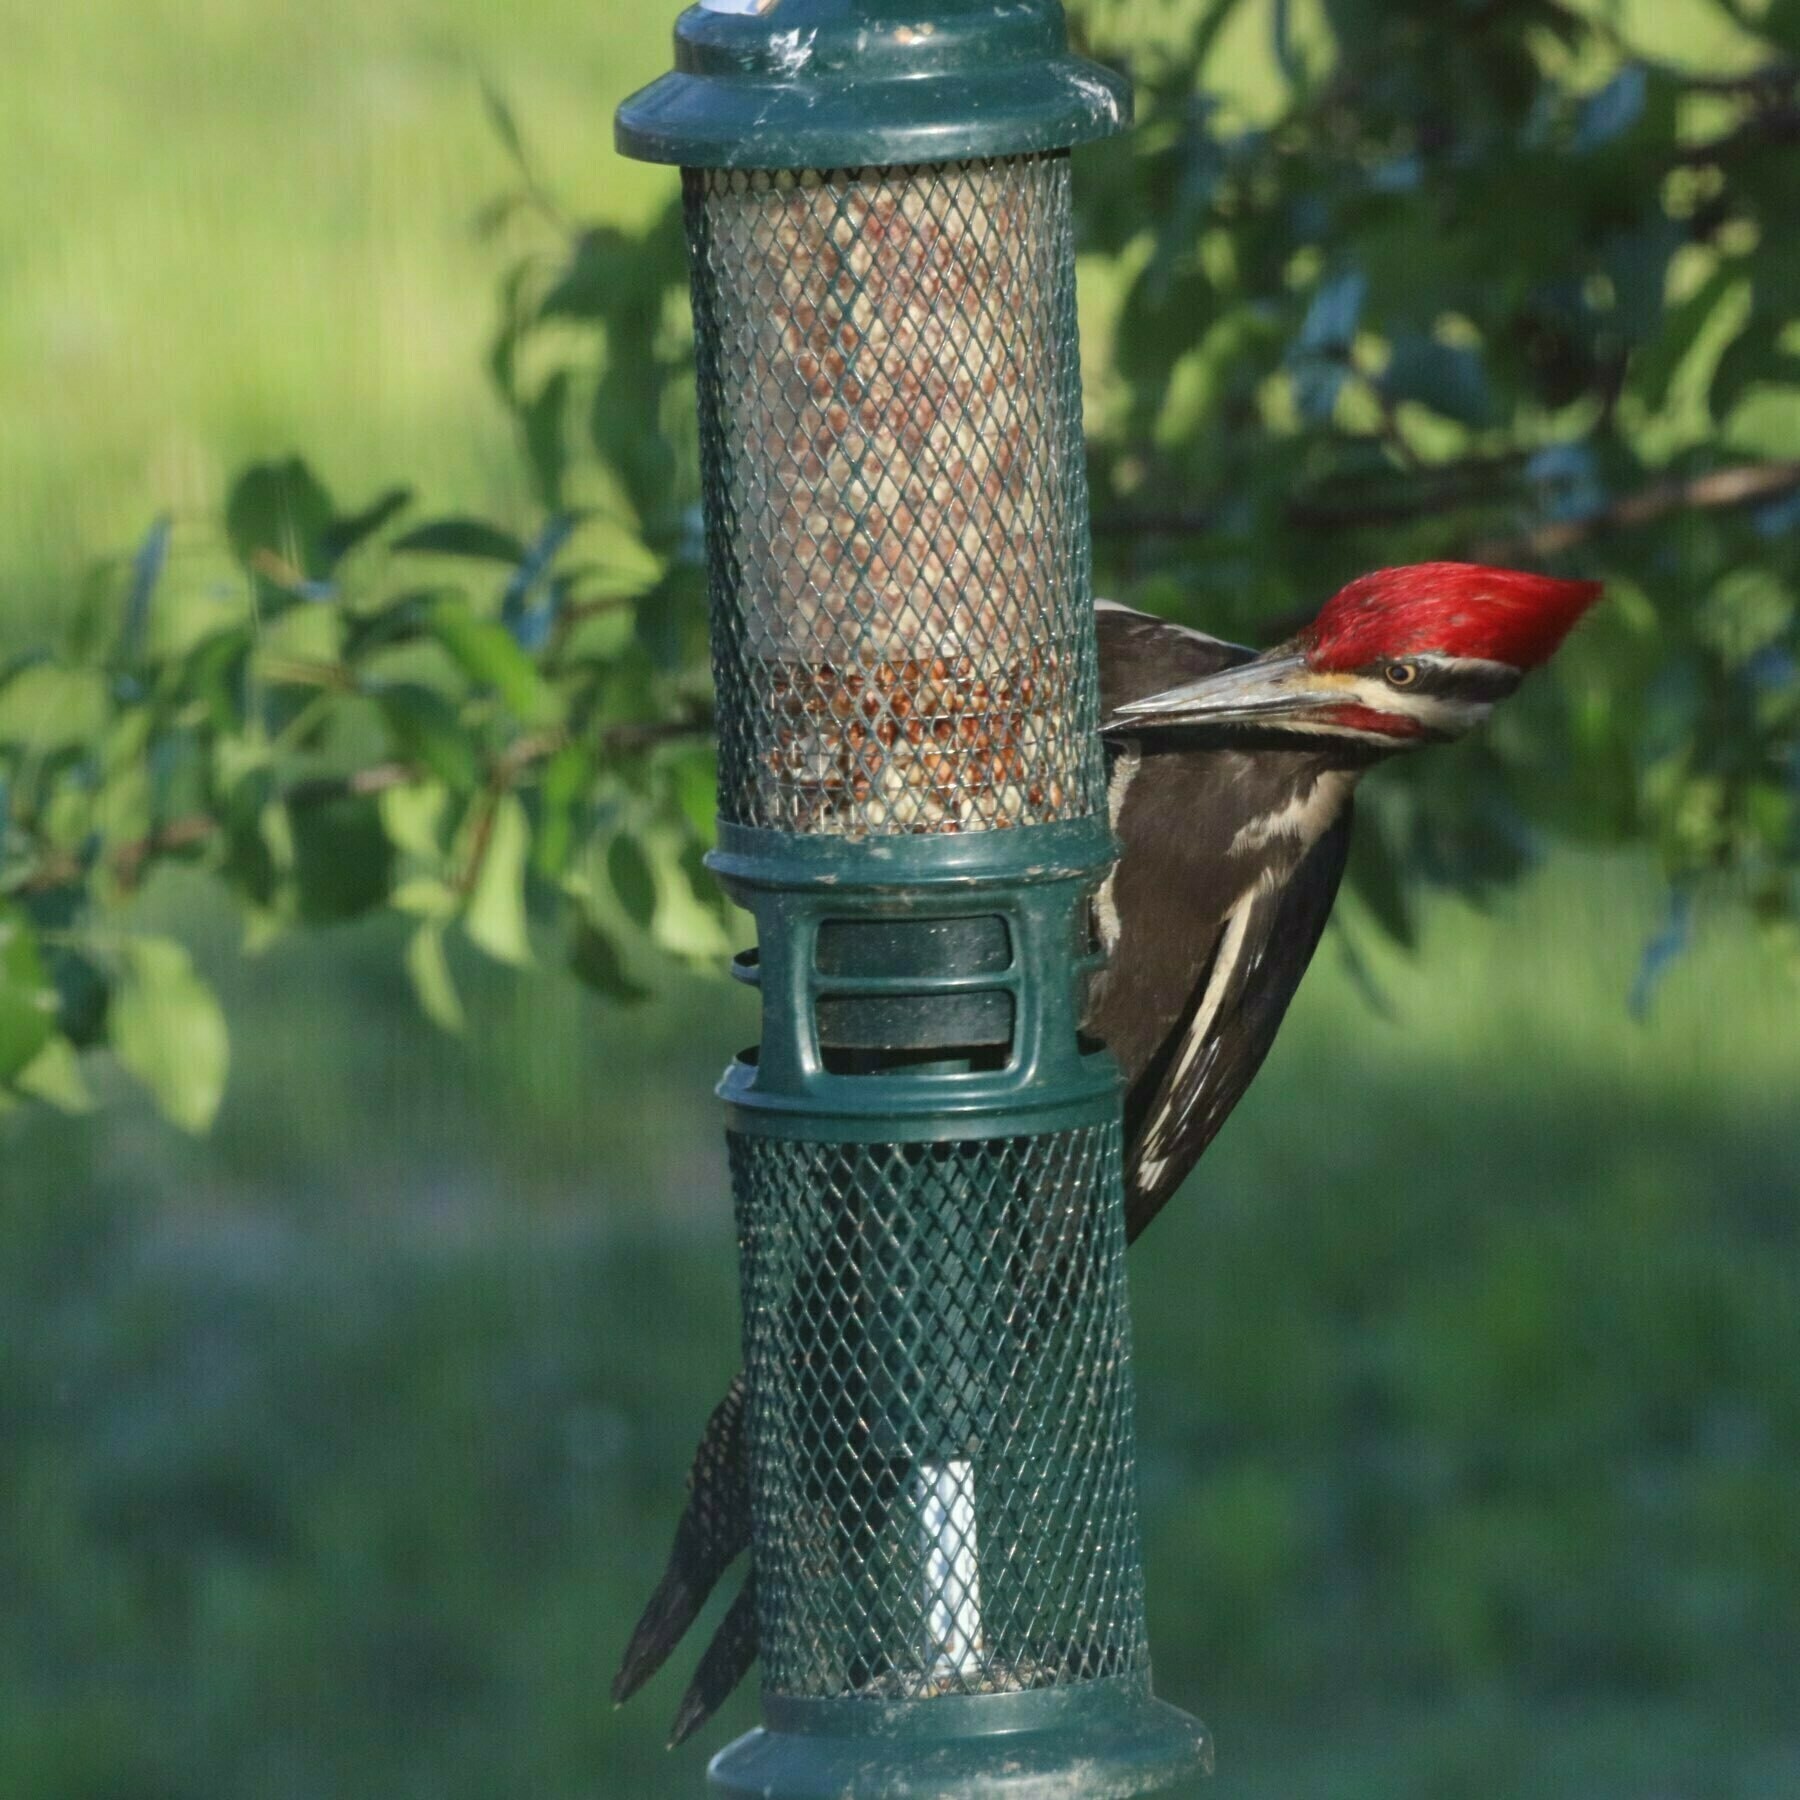 Pileated woodpecker wrapped around a feeder